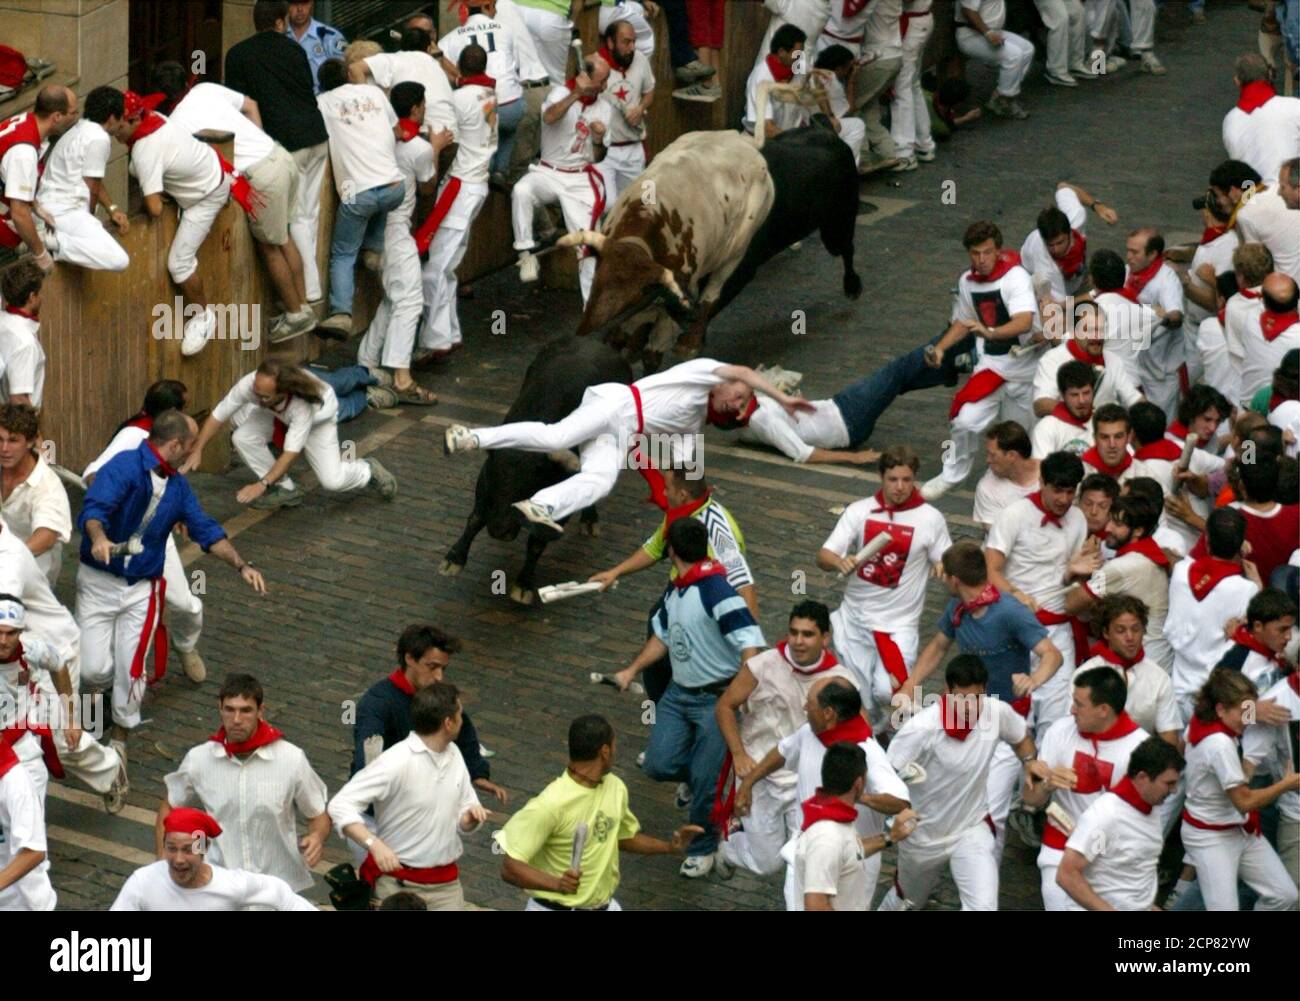 British bull runner David Bigging is lifted up by a bull while being gored during the sixth running of the bulls of the San Fermin festival in Pamplona on July 12, 2003. A pack of six fighting bulls and steers runs through the centre of the town to the bullring every morning during the week long festival made famous by US writer Ernest Hemingway. Bigging was treated for injuries and taken by ambulance to hospital. REUTERS/Paul Hanna  PH/JV Stock Photo